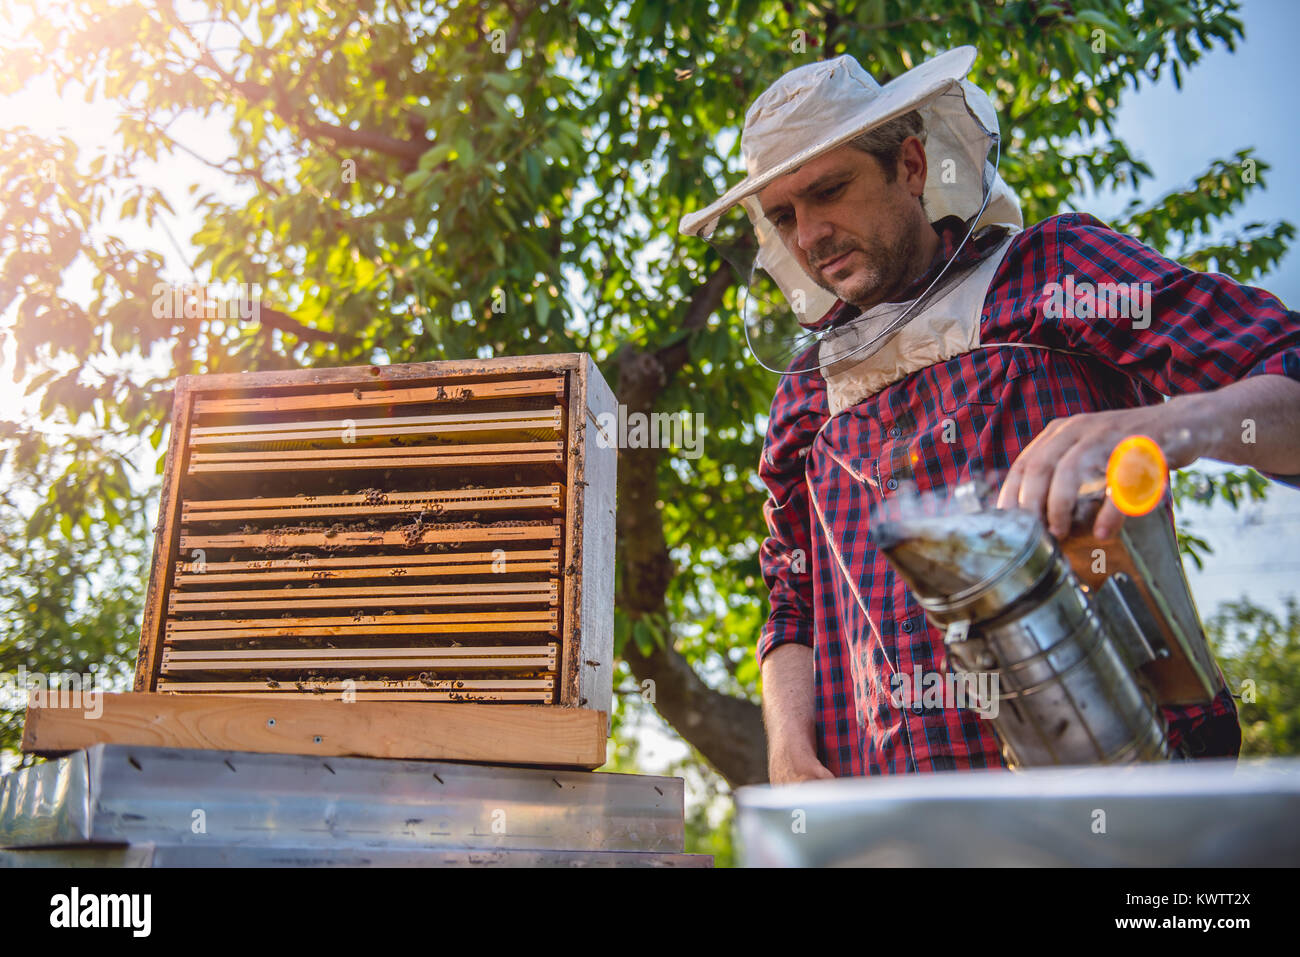 Beekeeper checking his honey bees and beehives Stock Photo